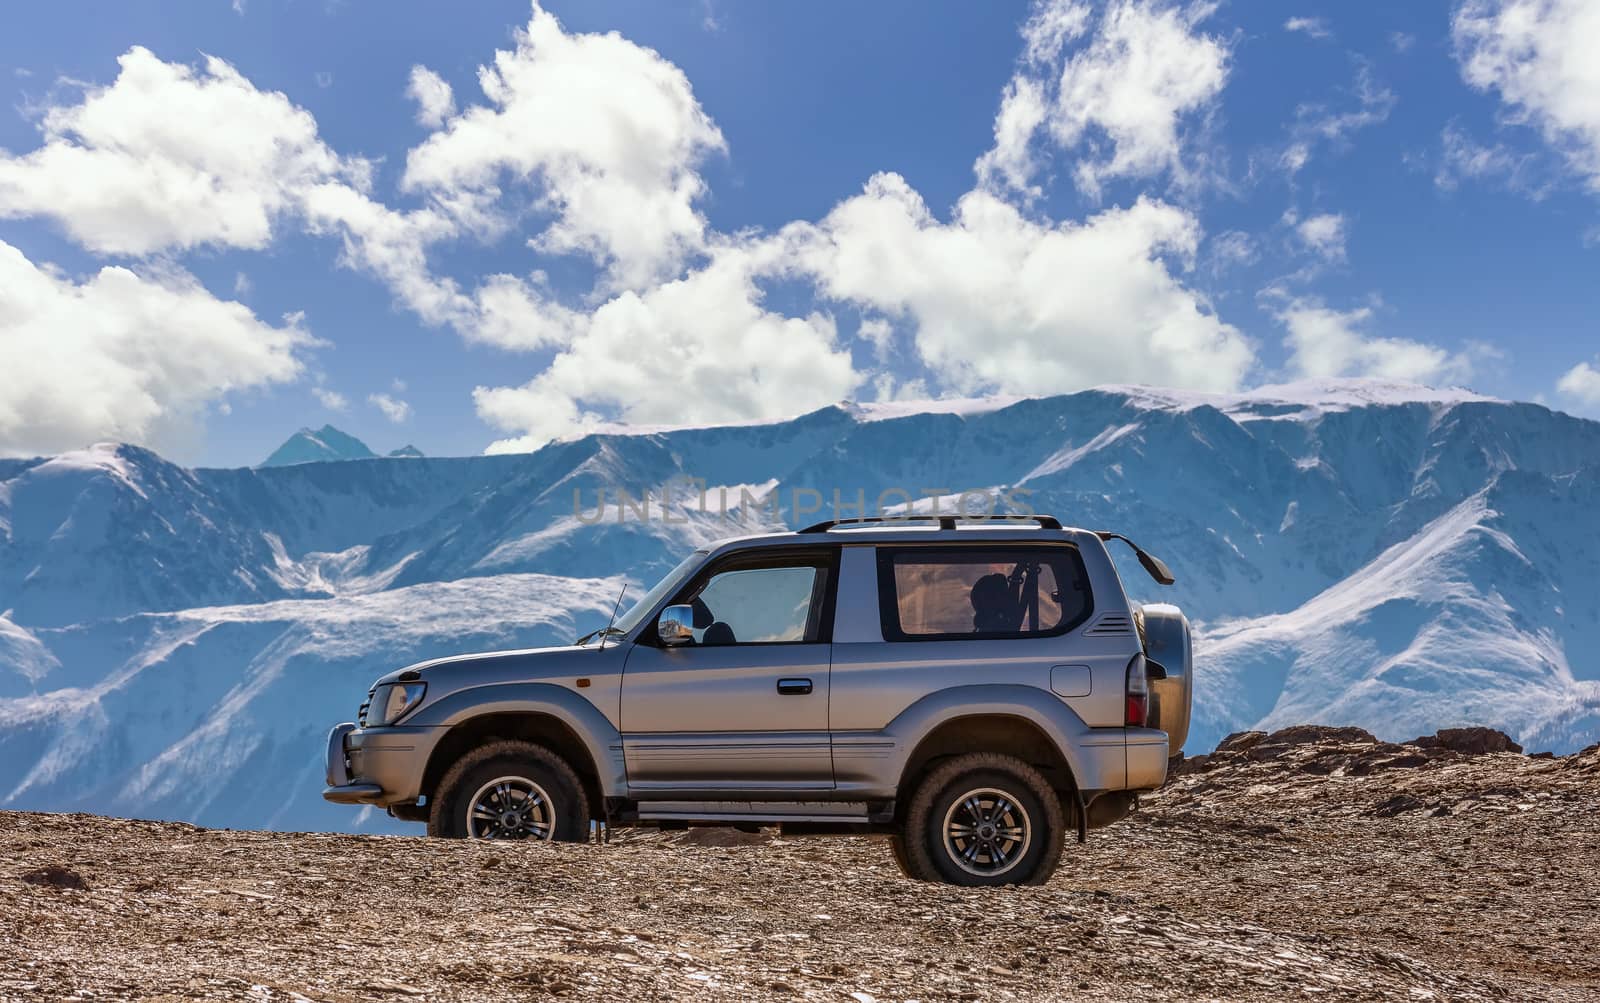 Scenic view of an off-road vehicle parked in the mountains. White snowy mountain ridge and beautiful blue sky as a background slightly out of focus. Altai mountains, Siberia, Russia.